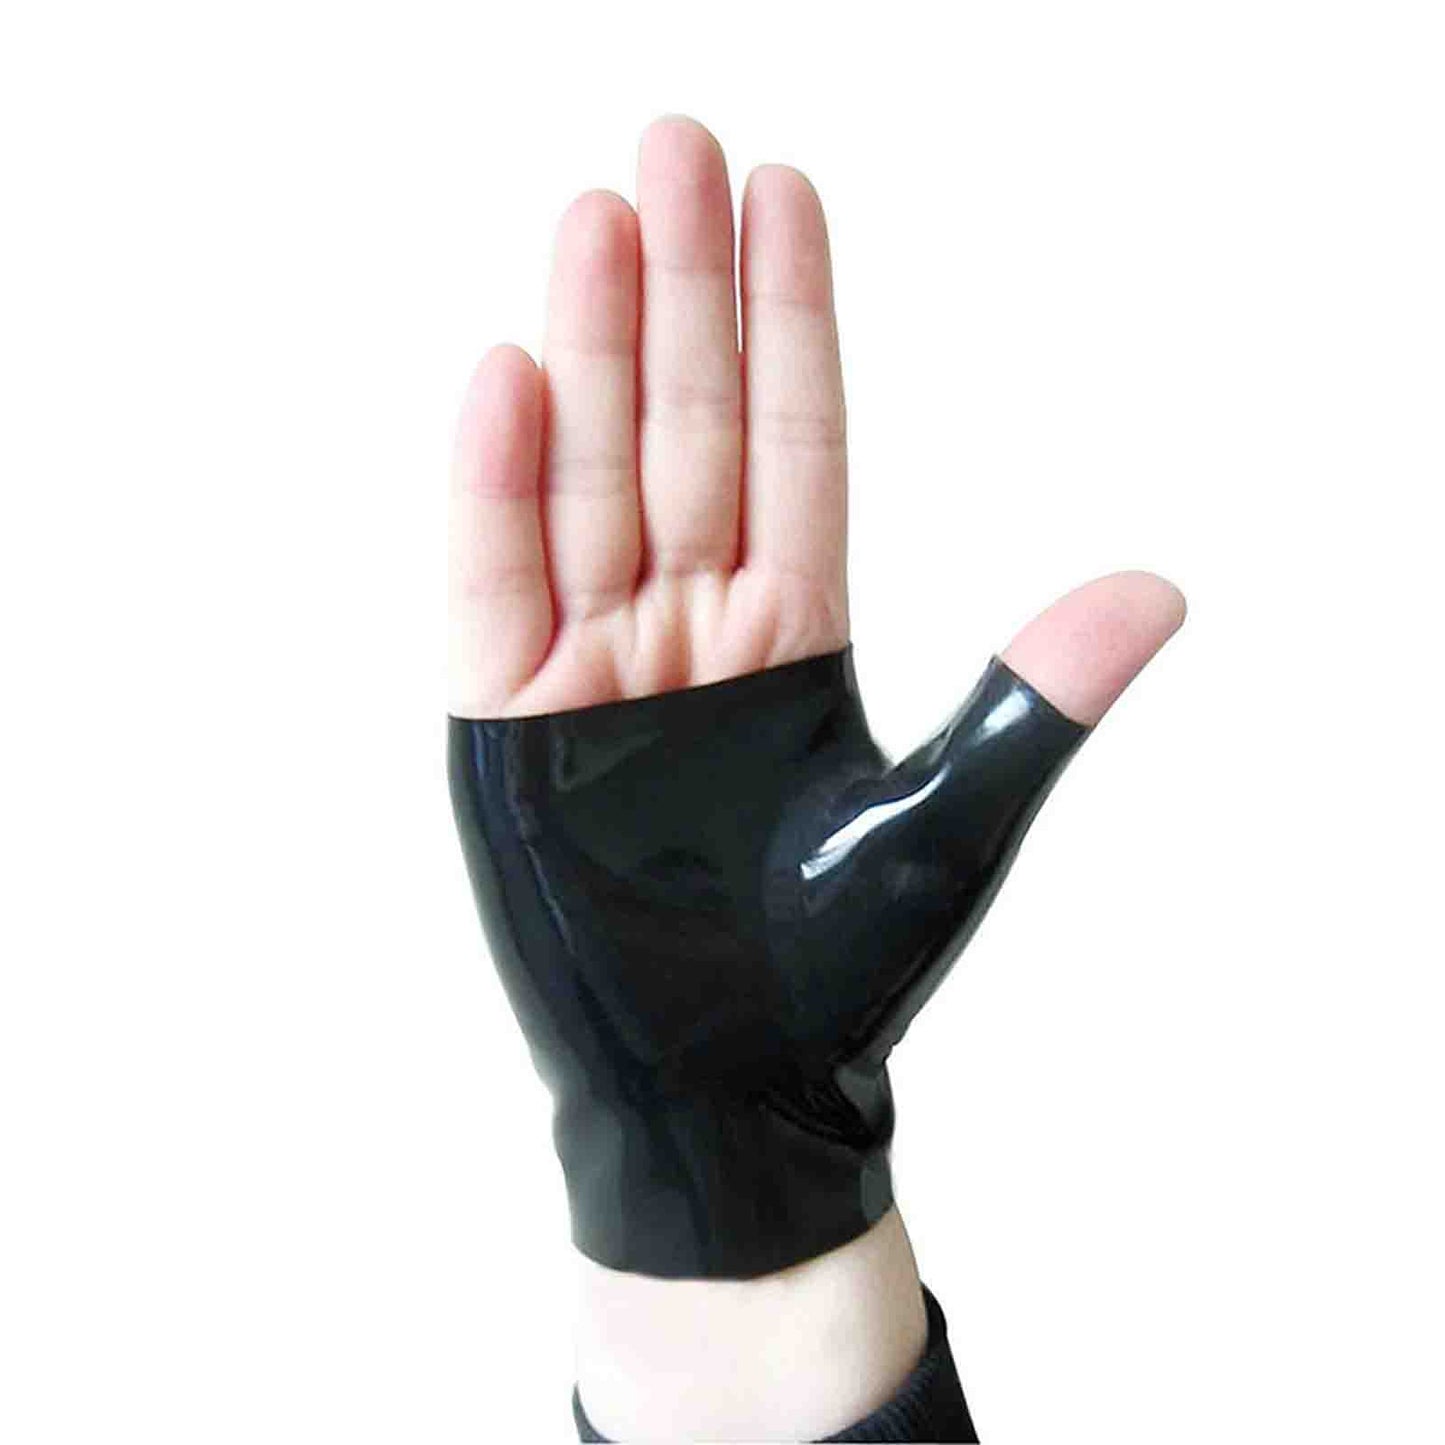 MONNIK Black Latex short Gloves sexy Unisex Rubber Half-open design with exposed fingers for fetish Catsuit party club wear